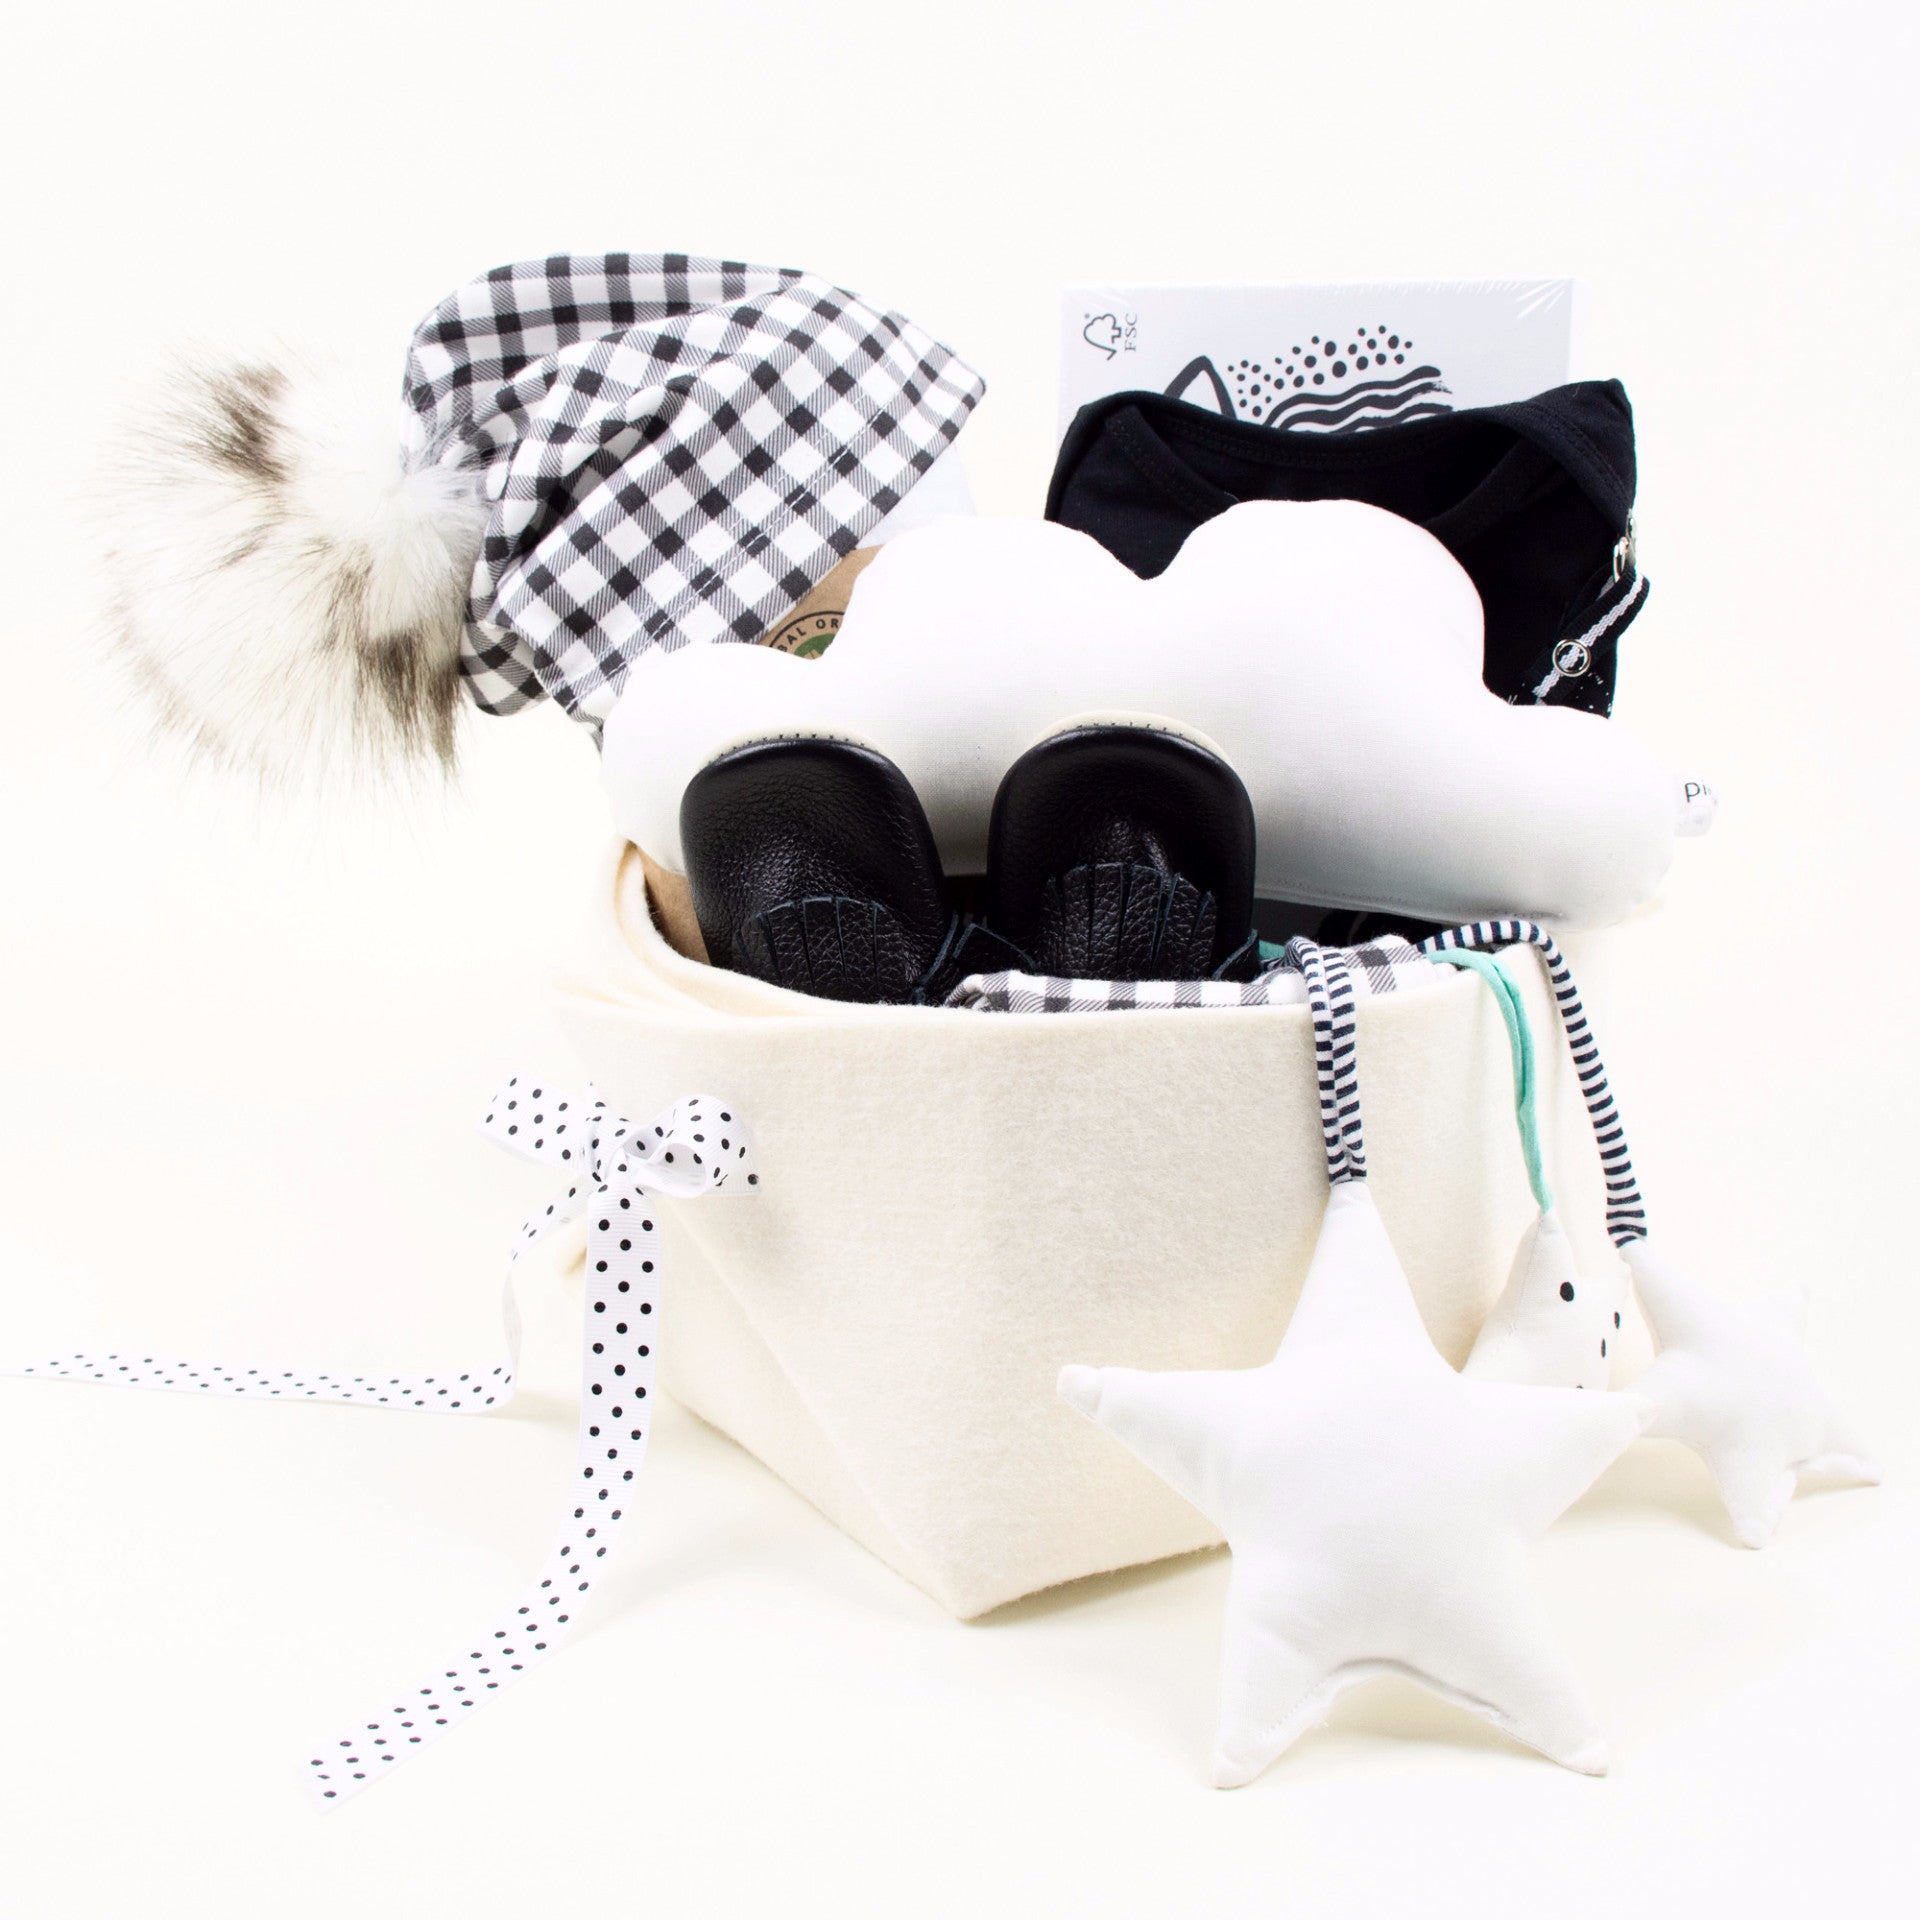 Cool Baby Gift Basket Monochrome at Bonjour Baby Baskets